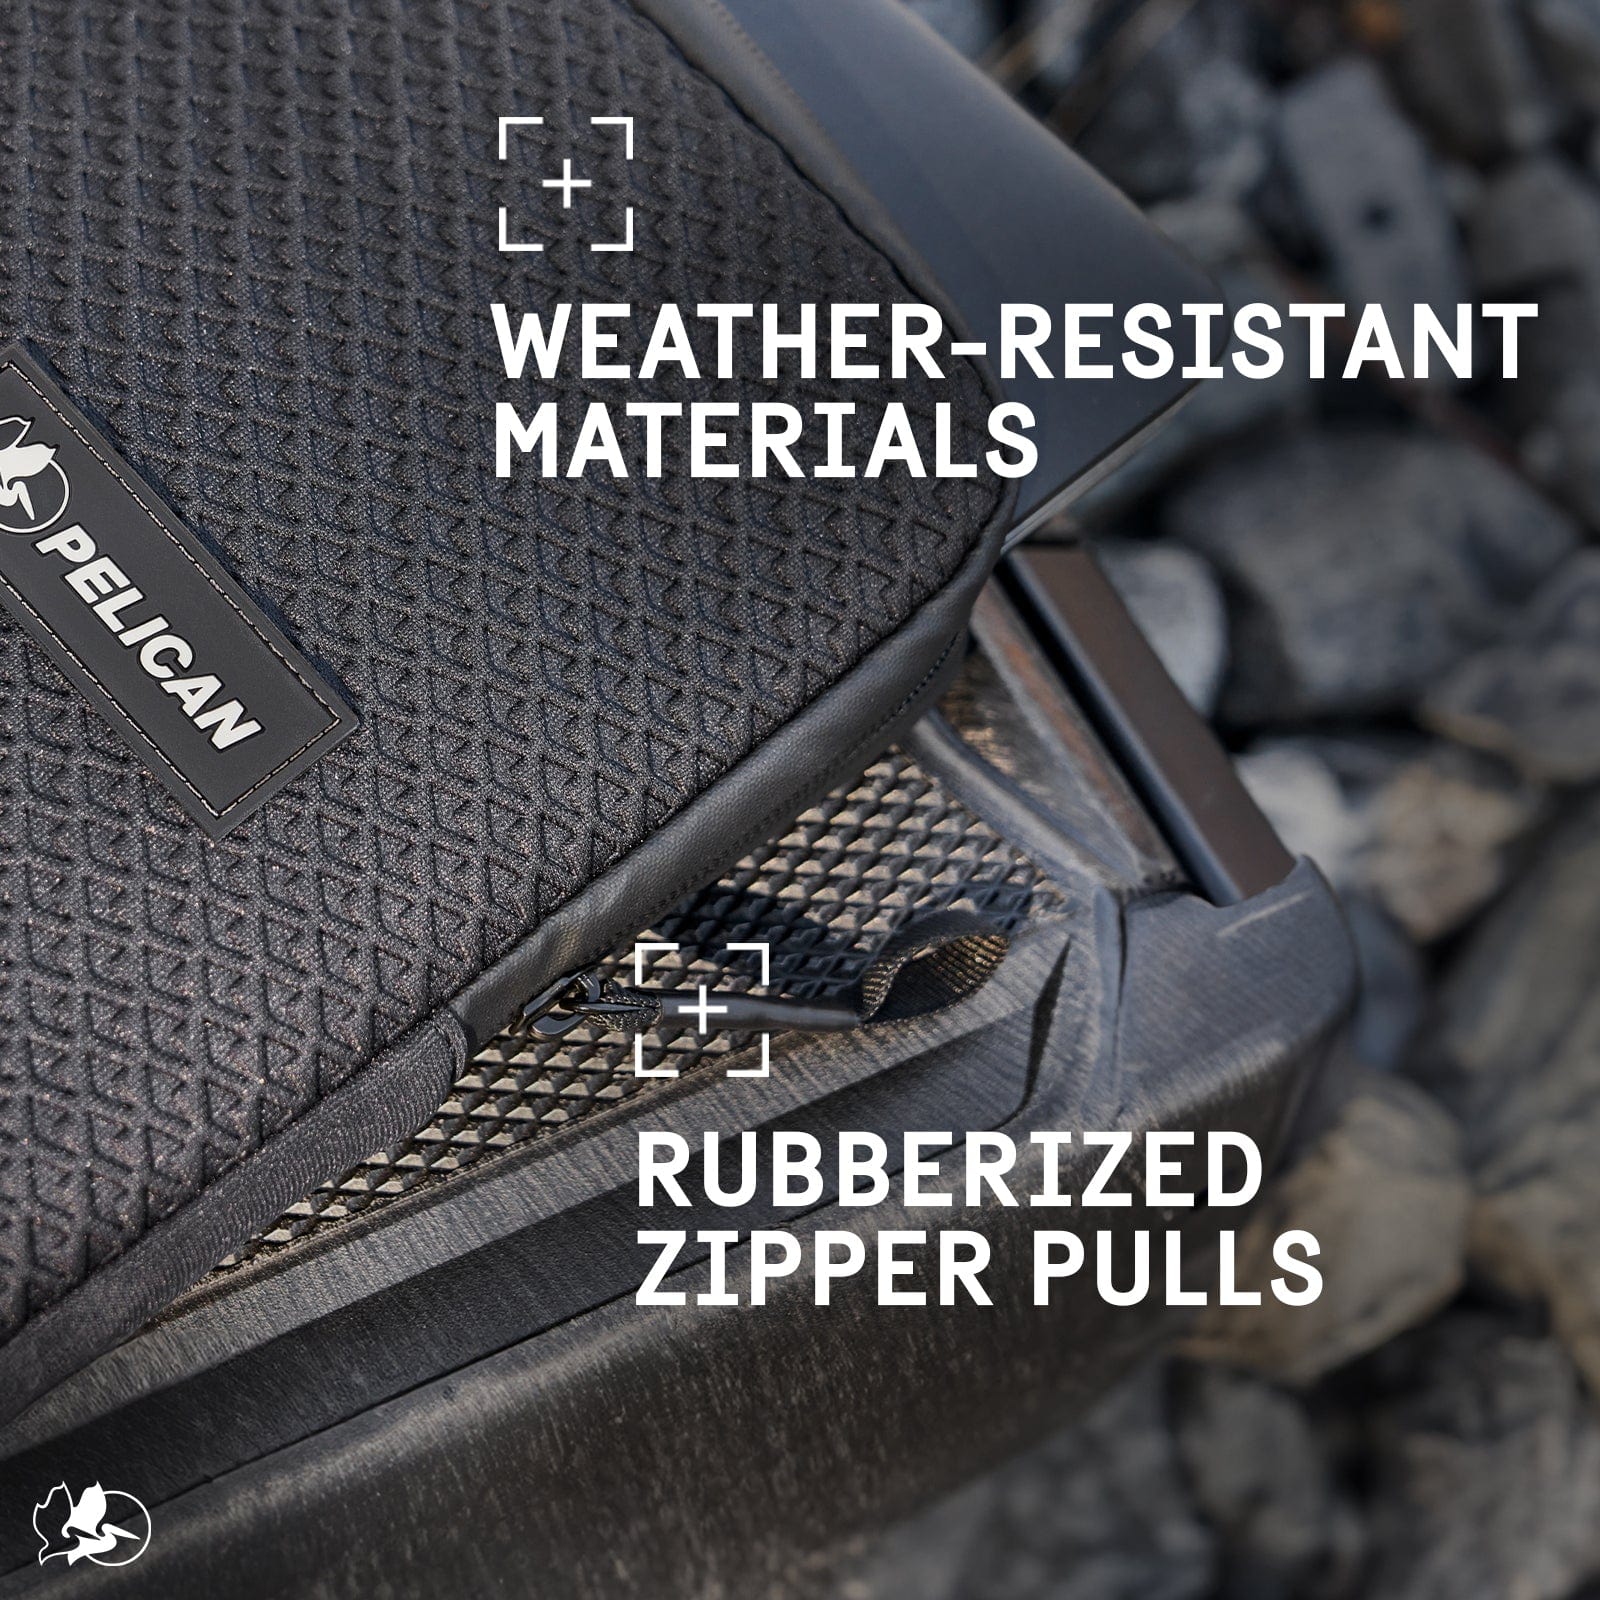 WEATHER RESISTANT MATERIALS. RUBBERIZED ZIPPER PULLS